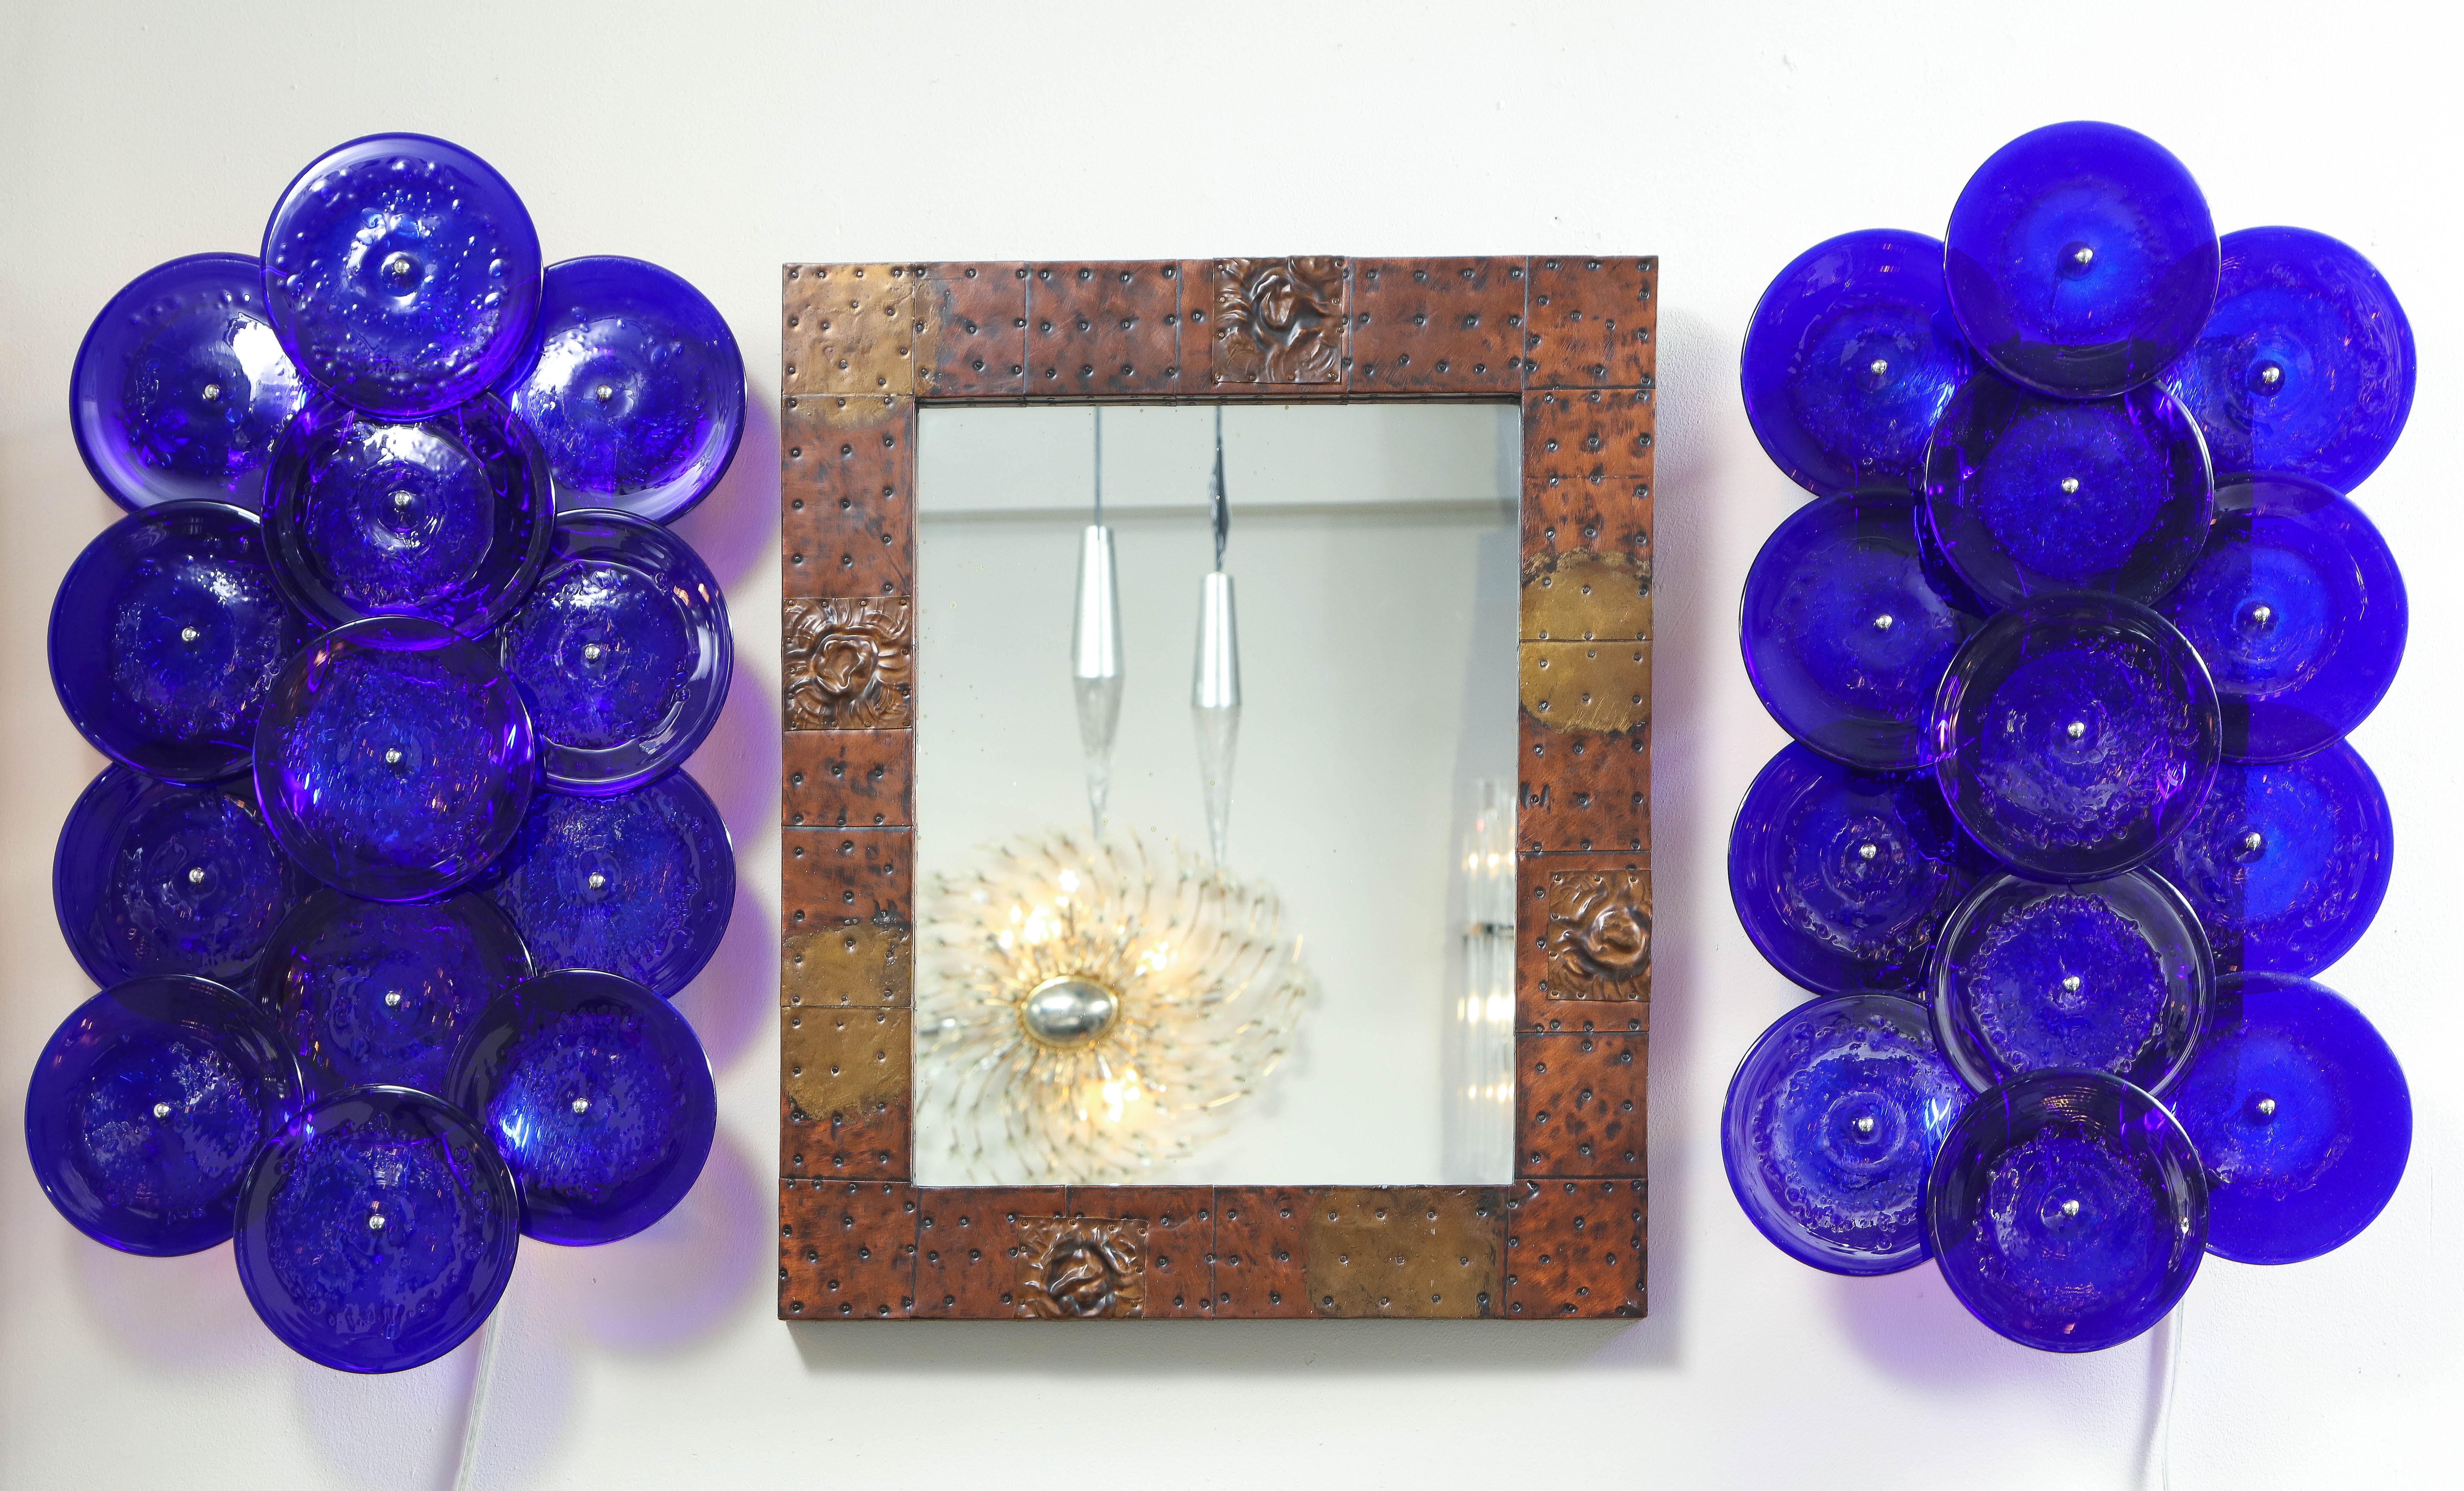 Exceptional pair of sconces with Murano glass disc in deep and rich cobalt blue color. Each sconce has 6 candelabra base sockets to illuminate. This pair is currently available as shown in our NYC showroom. Custom orders are also available for